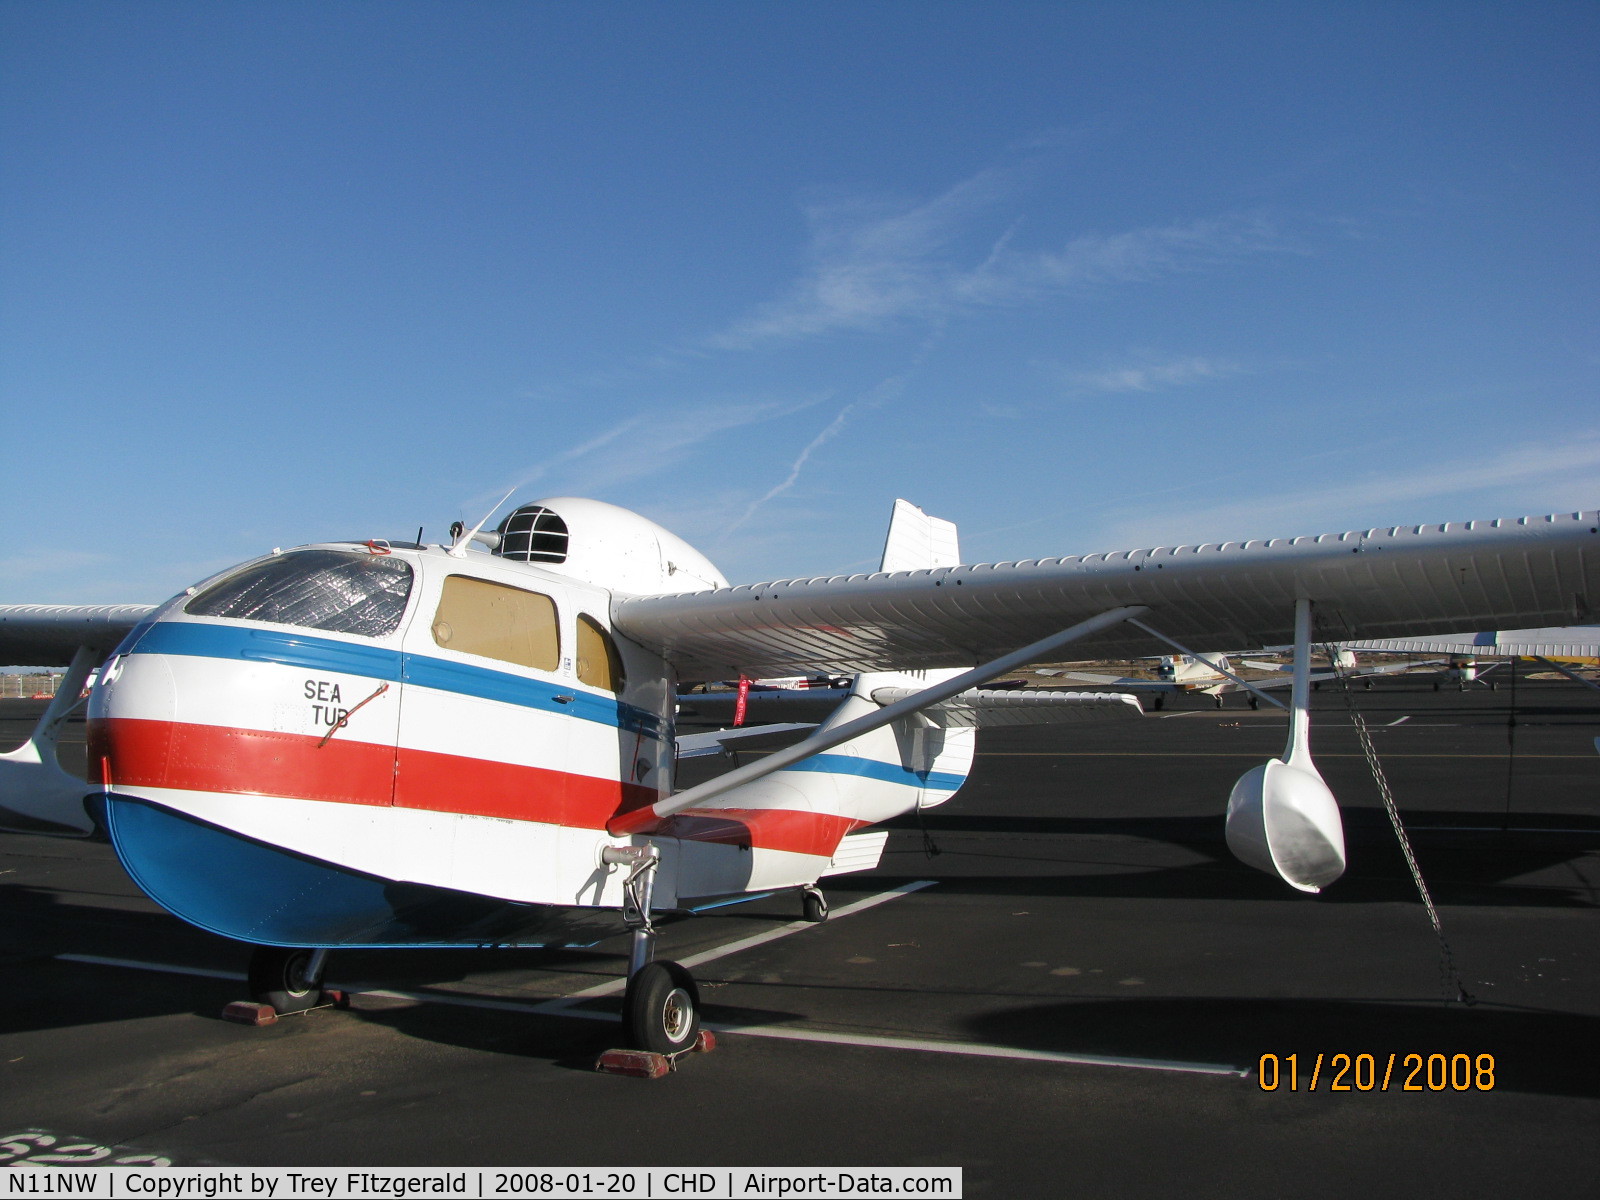 N11NW, 1947 Republic RC-3 Seabee Seabee C/N 779, The Seabee on firm land at Chandler airport.  KCHD